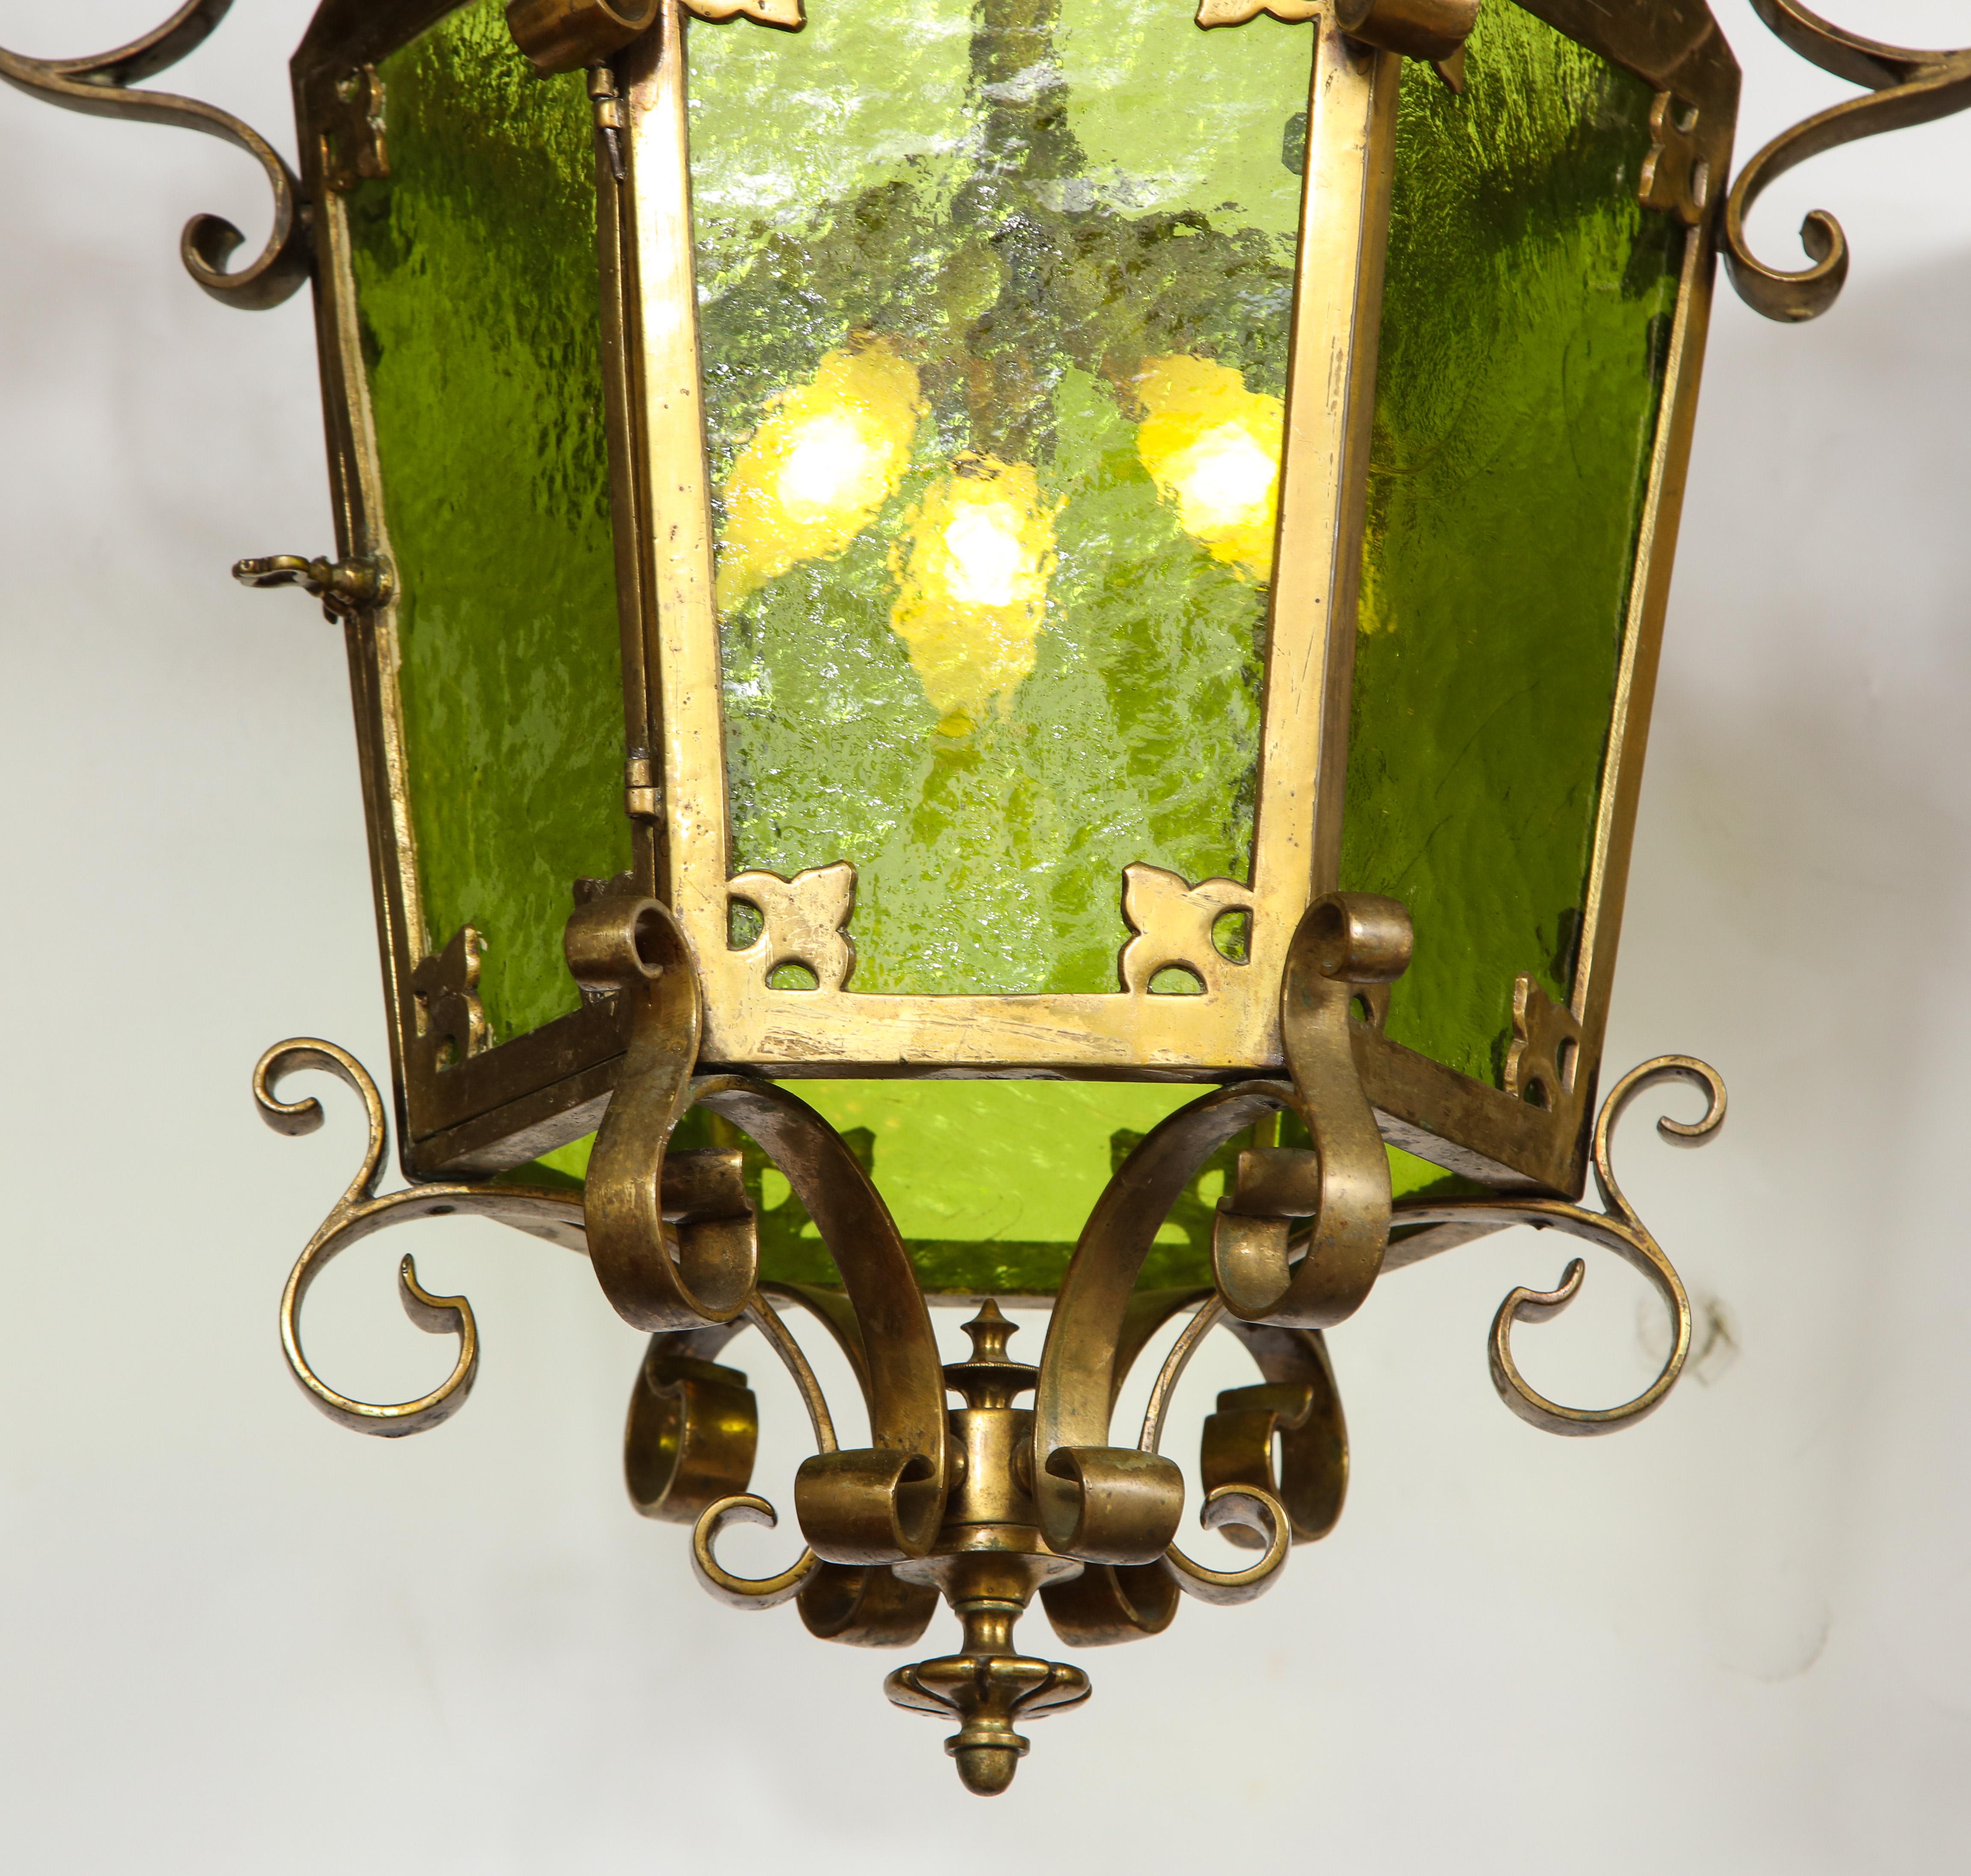 Unique large bronze scrolled lantern with green glass and three electrified sockets